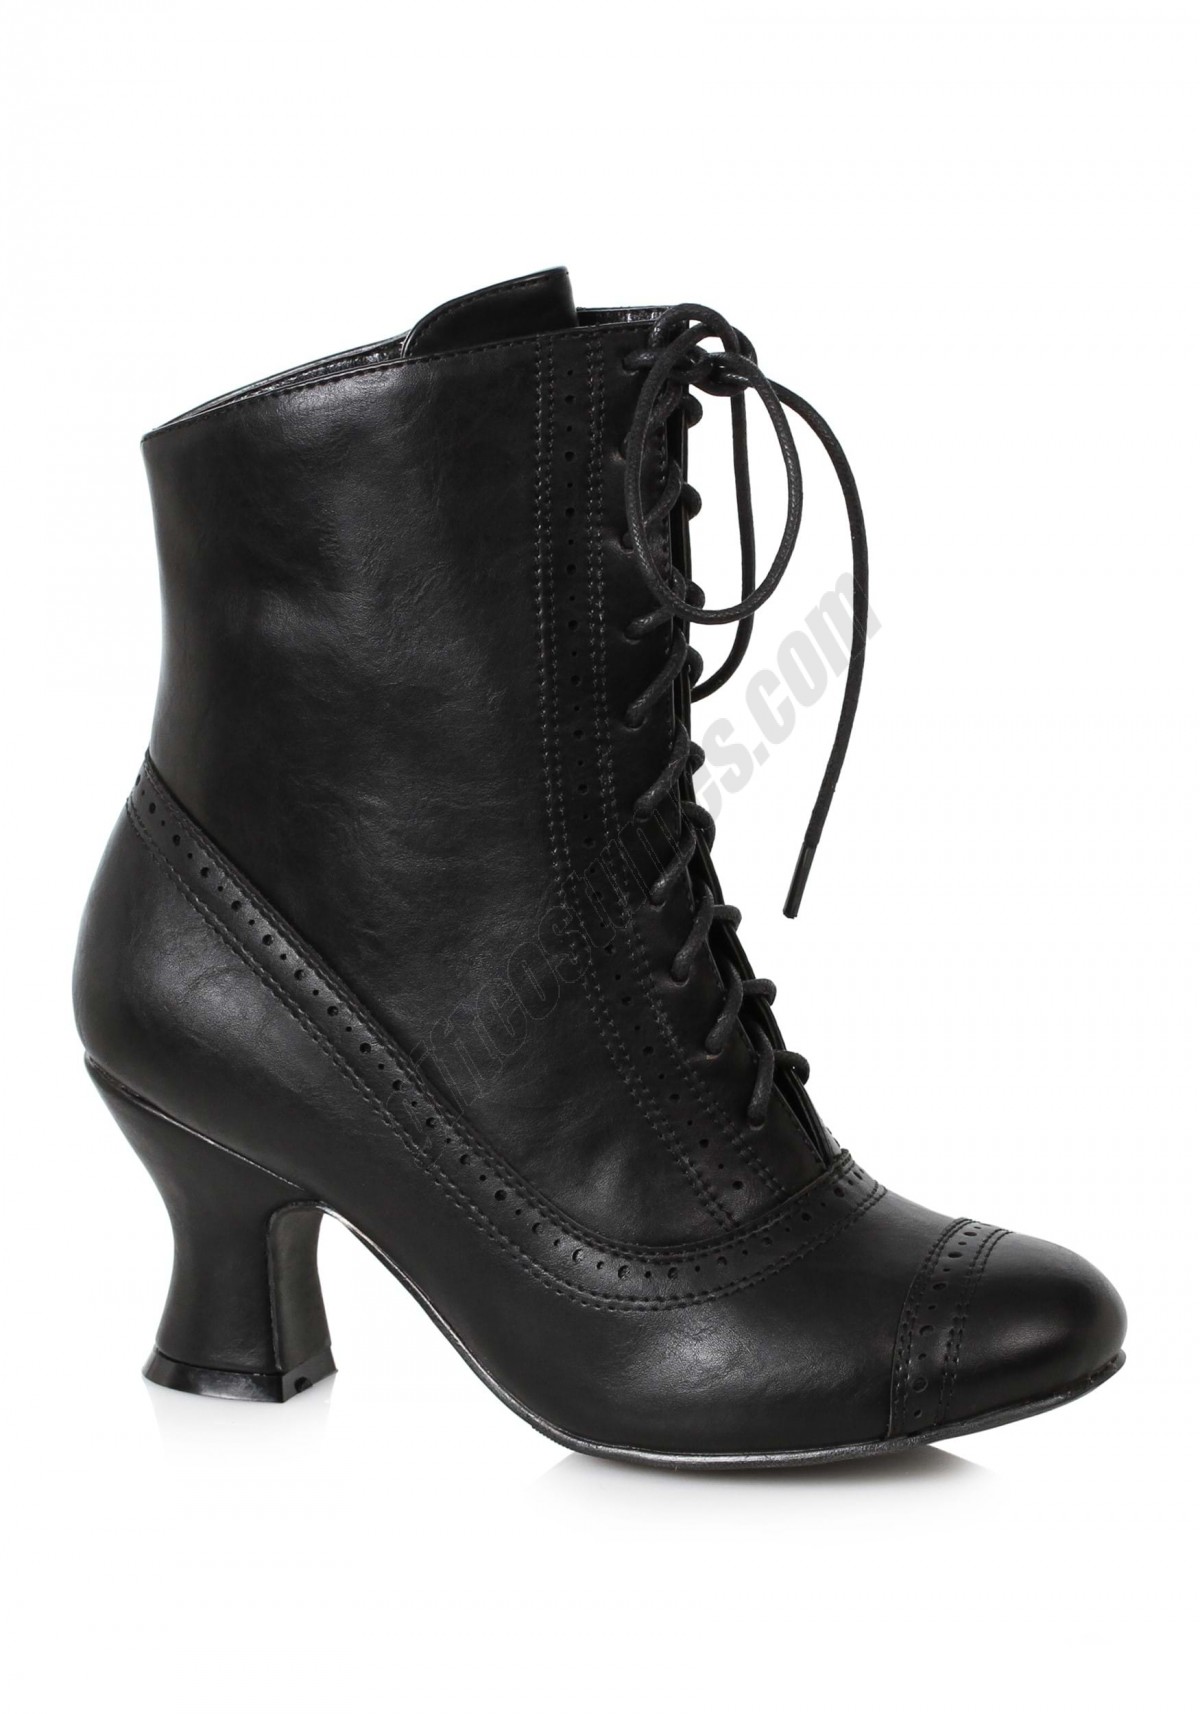 Black Victorian Boots for Women Promotions - -0